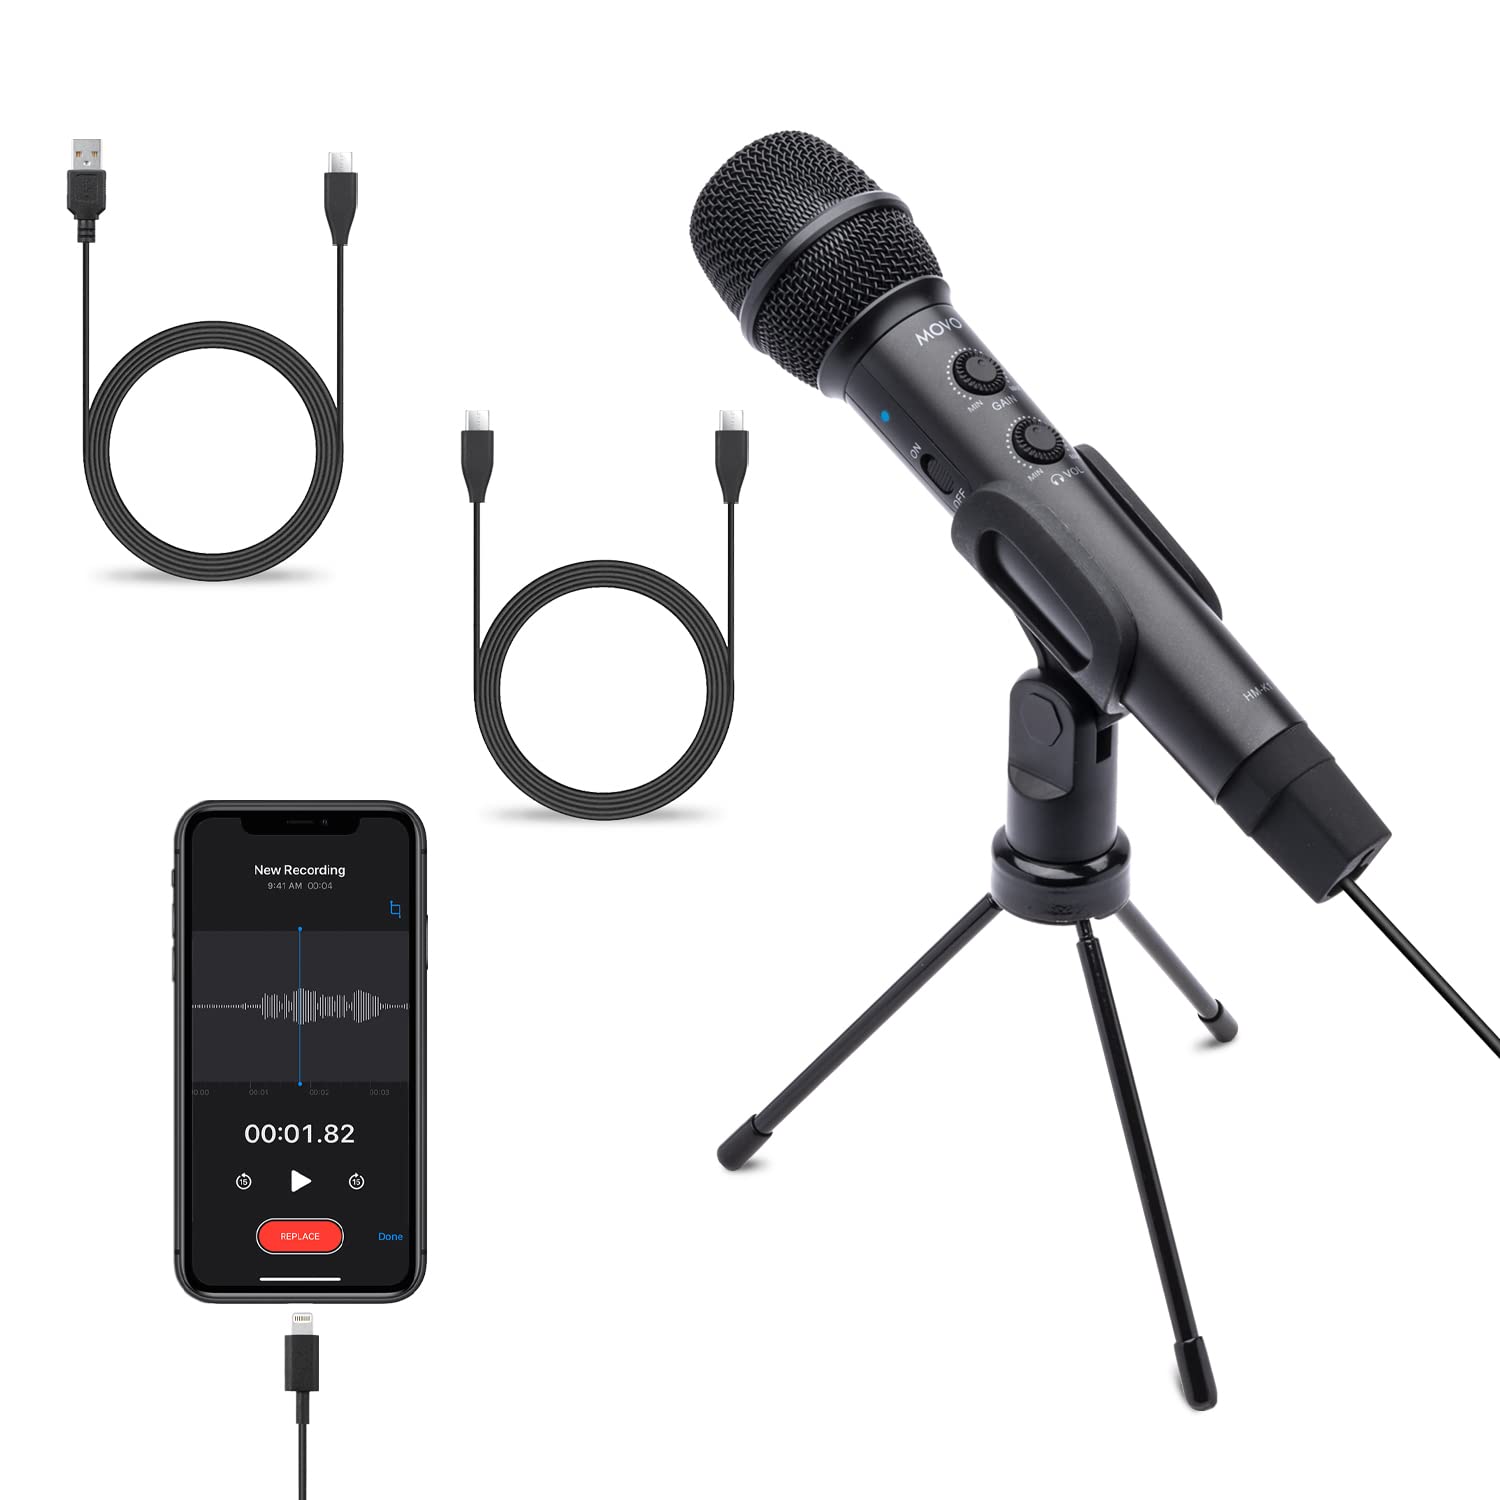 Movo HM-K1 Handheld Digital Cardioid Condenser Microphone for iPhone, Android, Computer with Mic Stand - USB, USB C and Lightning Connector Cables - Mic Compatible with PC, Mac, iPhone, iPad, Android  - Like New